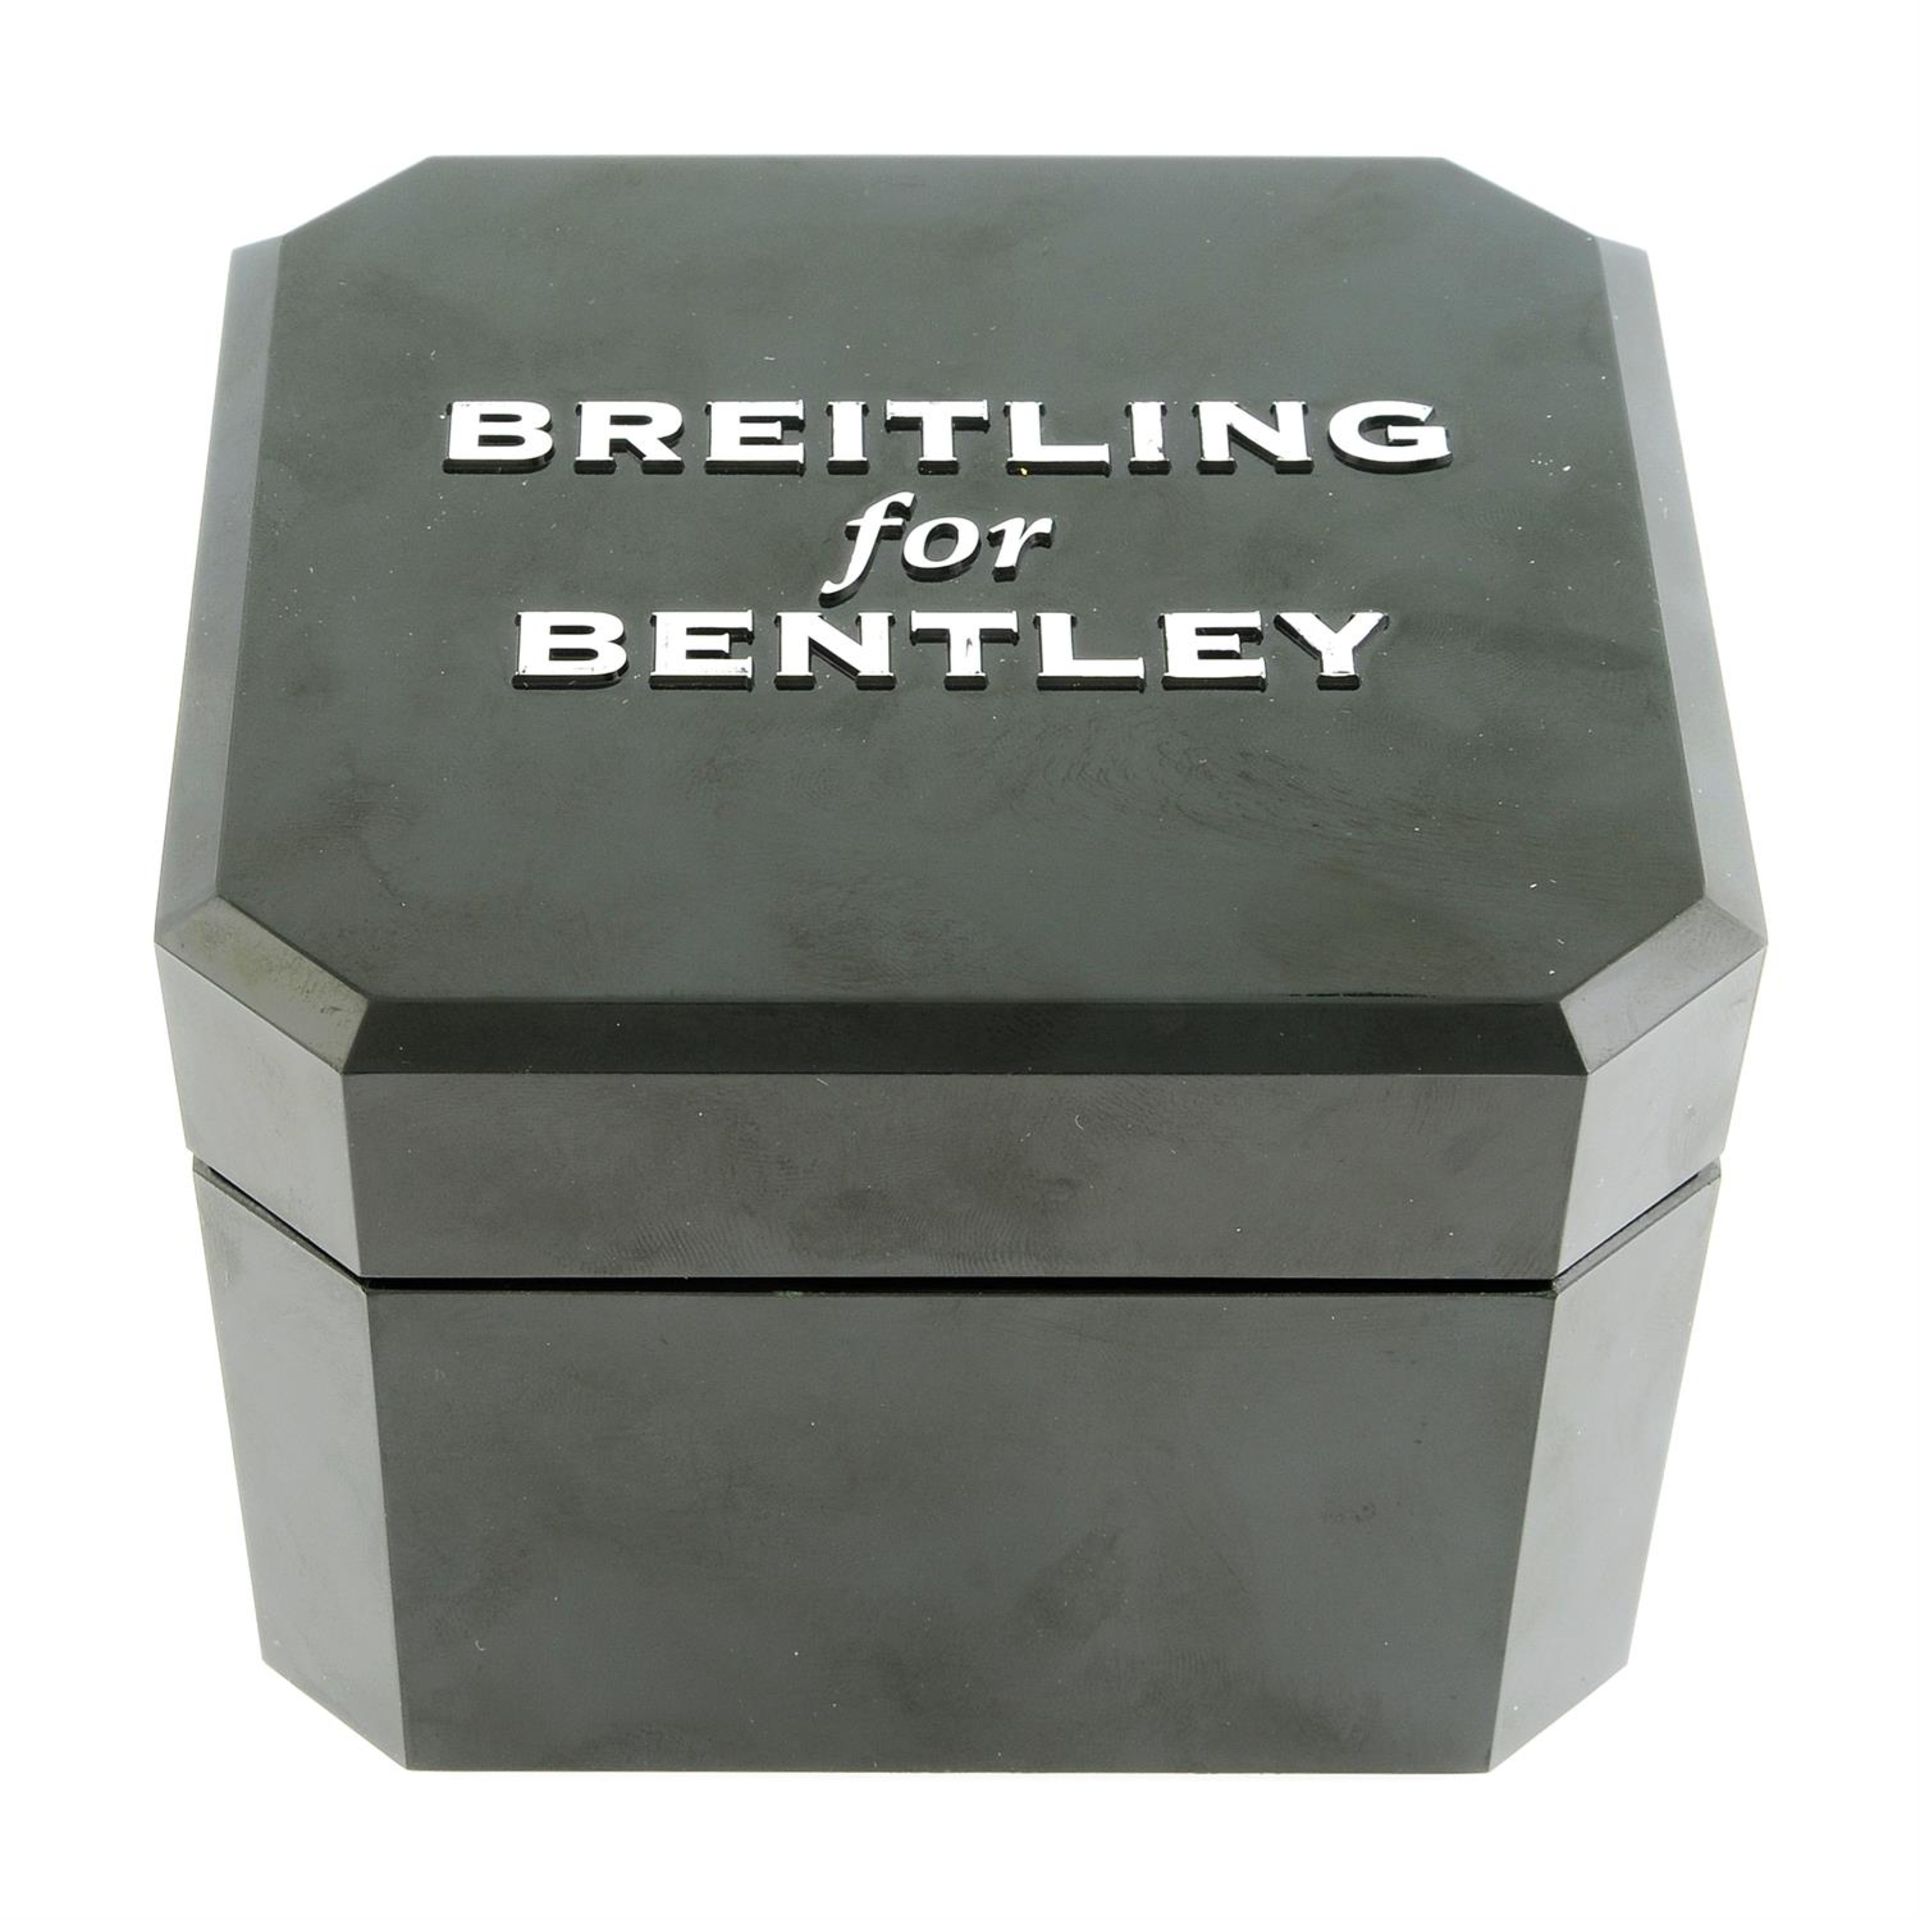 BREITLING - a stainless steel Breitling for Bentley chronograph bracelet watch, 49mm. - Image 6 of 6